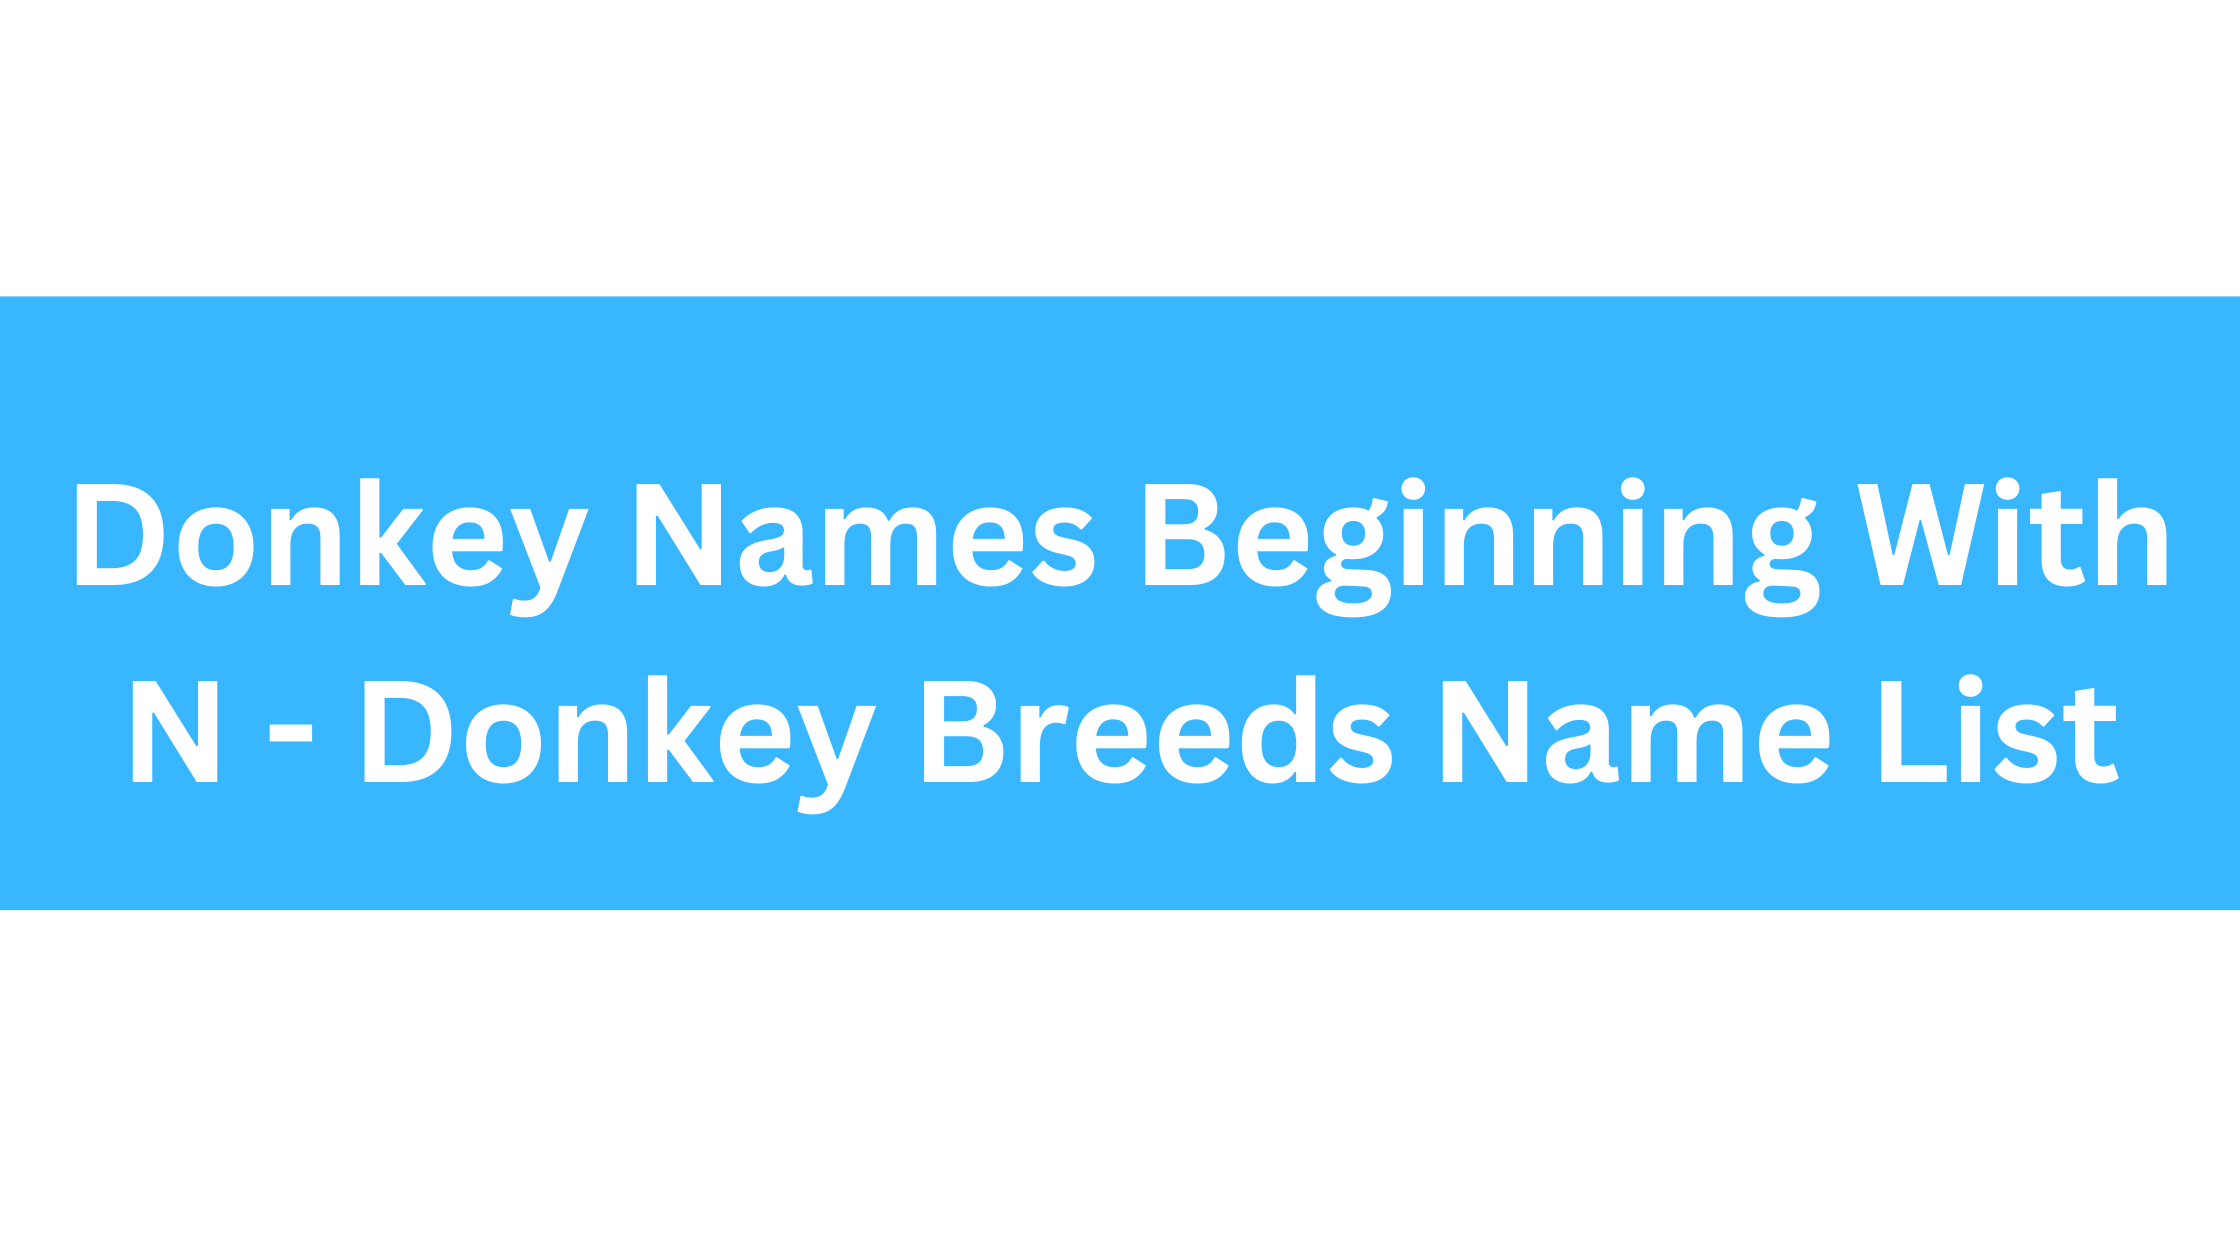 Donkey Names Beginning With N